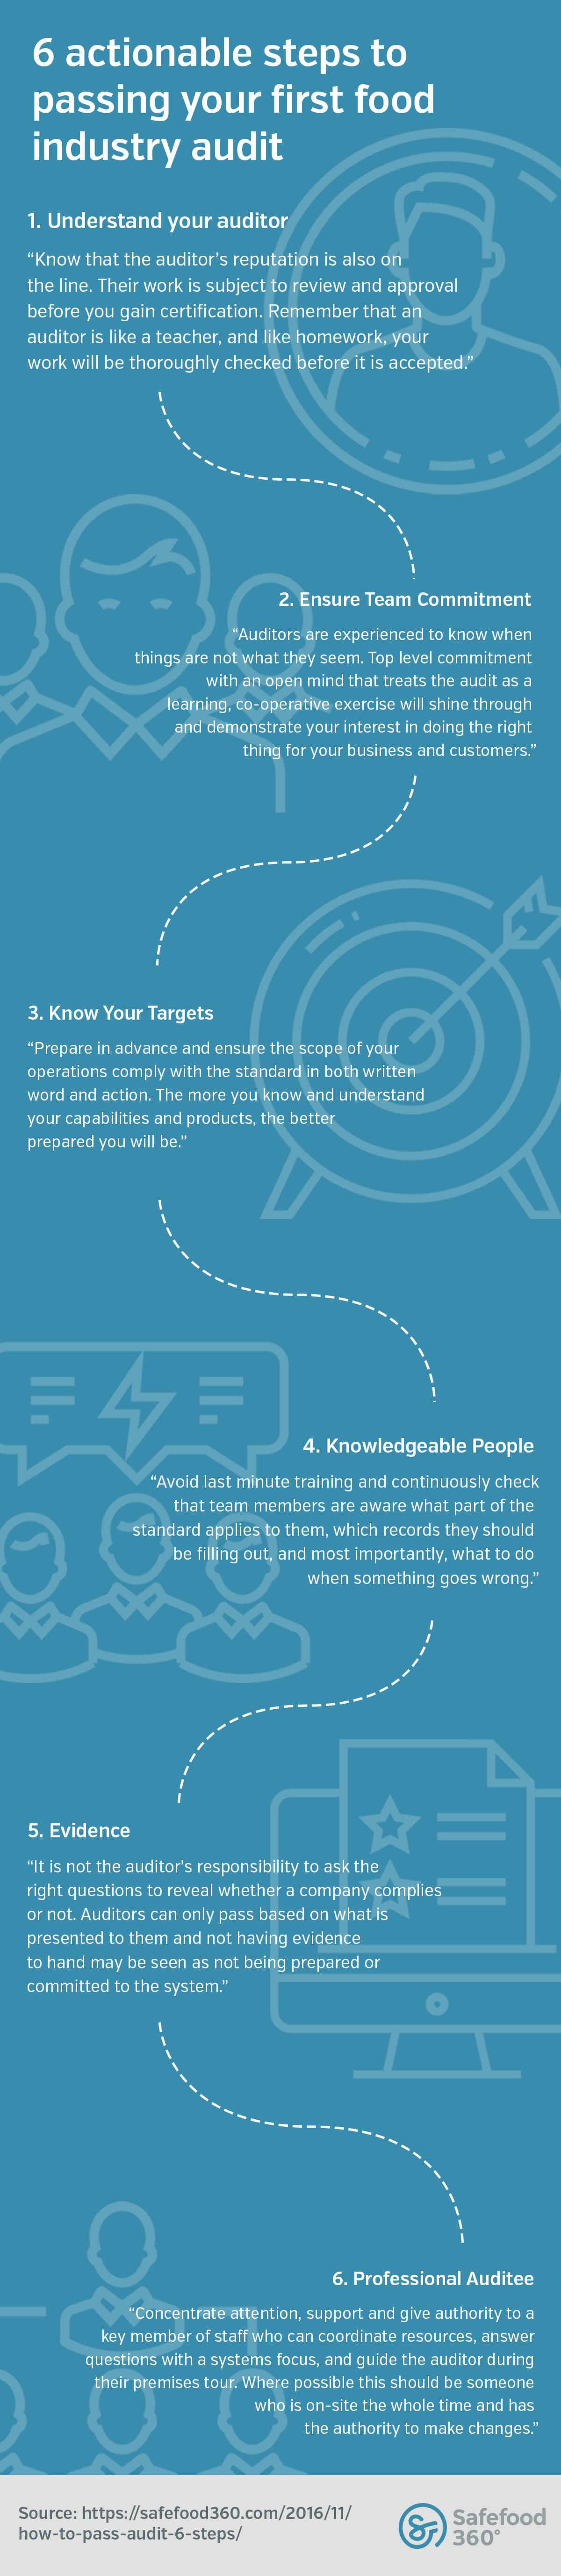 Infographic 6 actionable steps to passing your first food safety audit